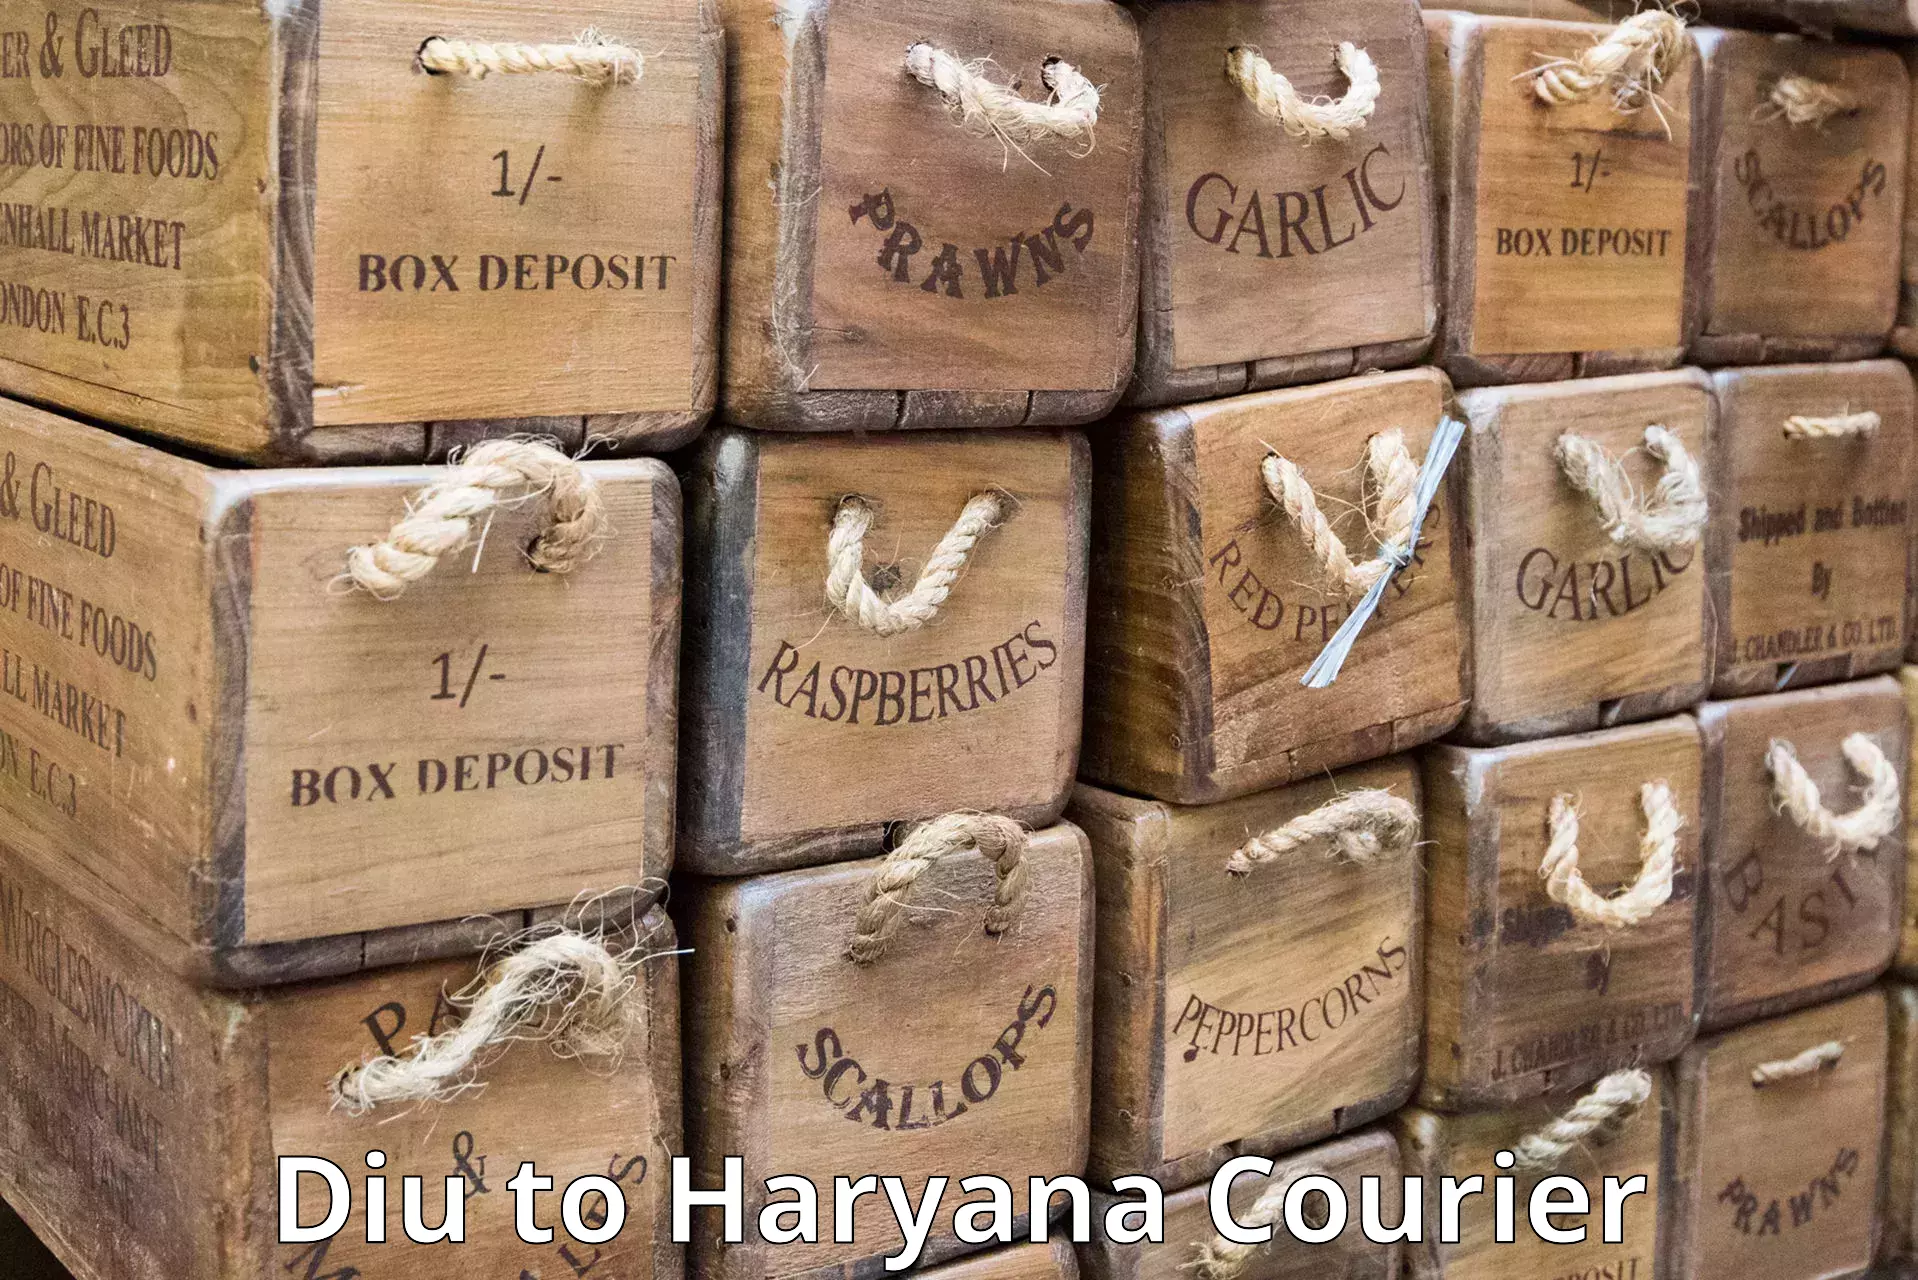 Flexible delivery schedules Diu to Haryana